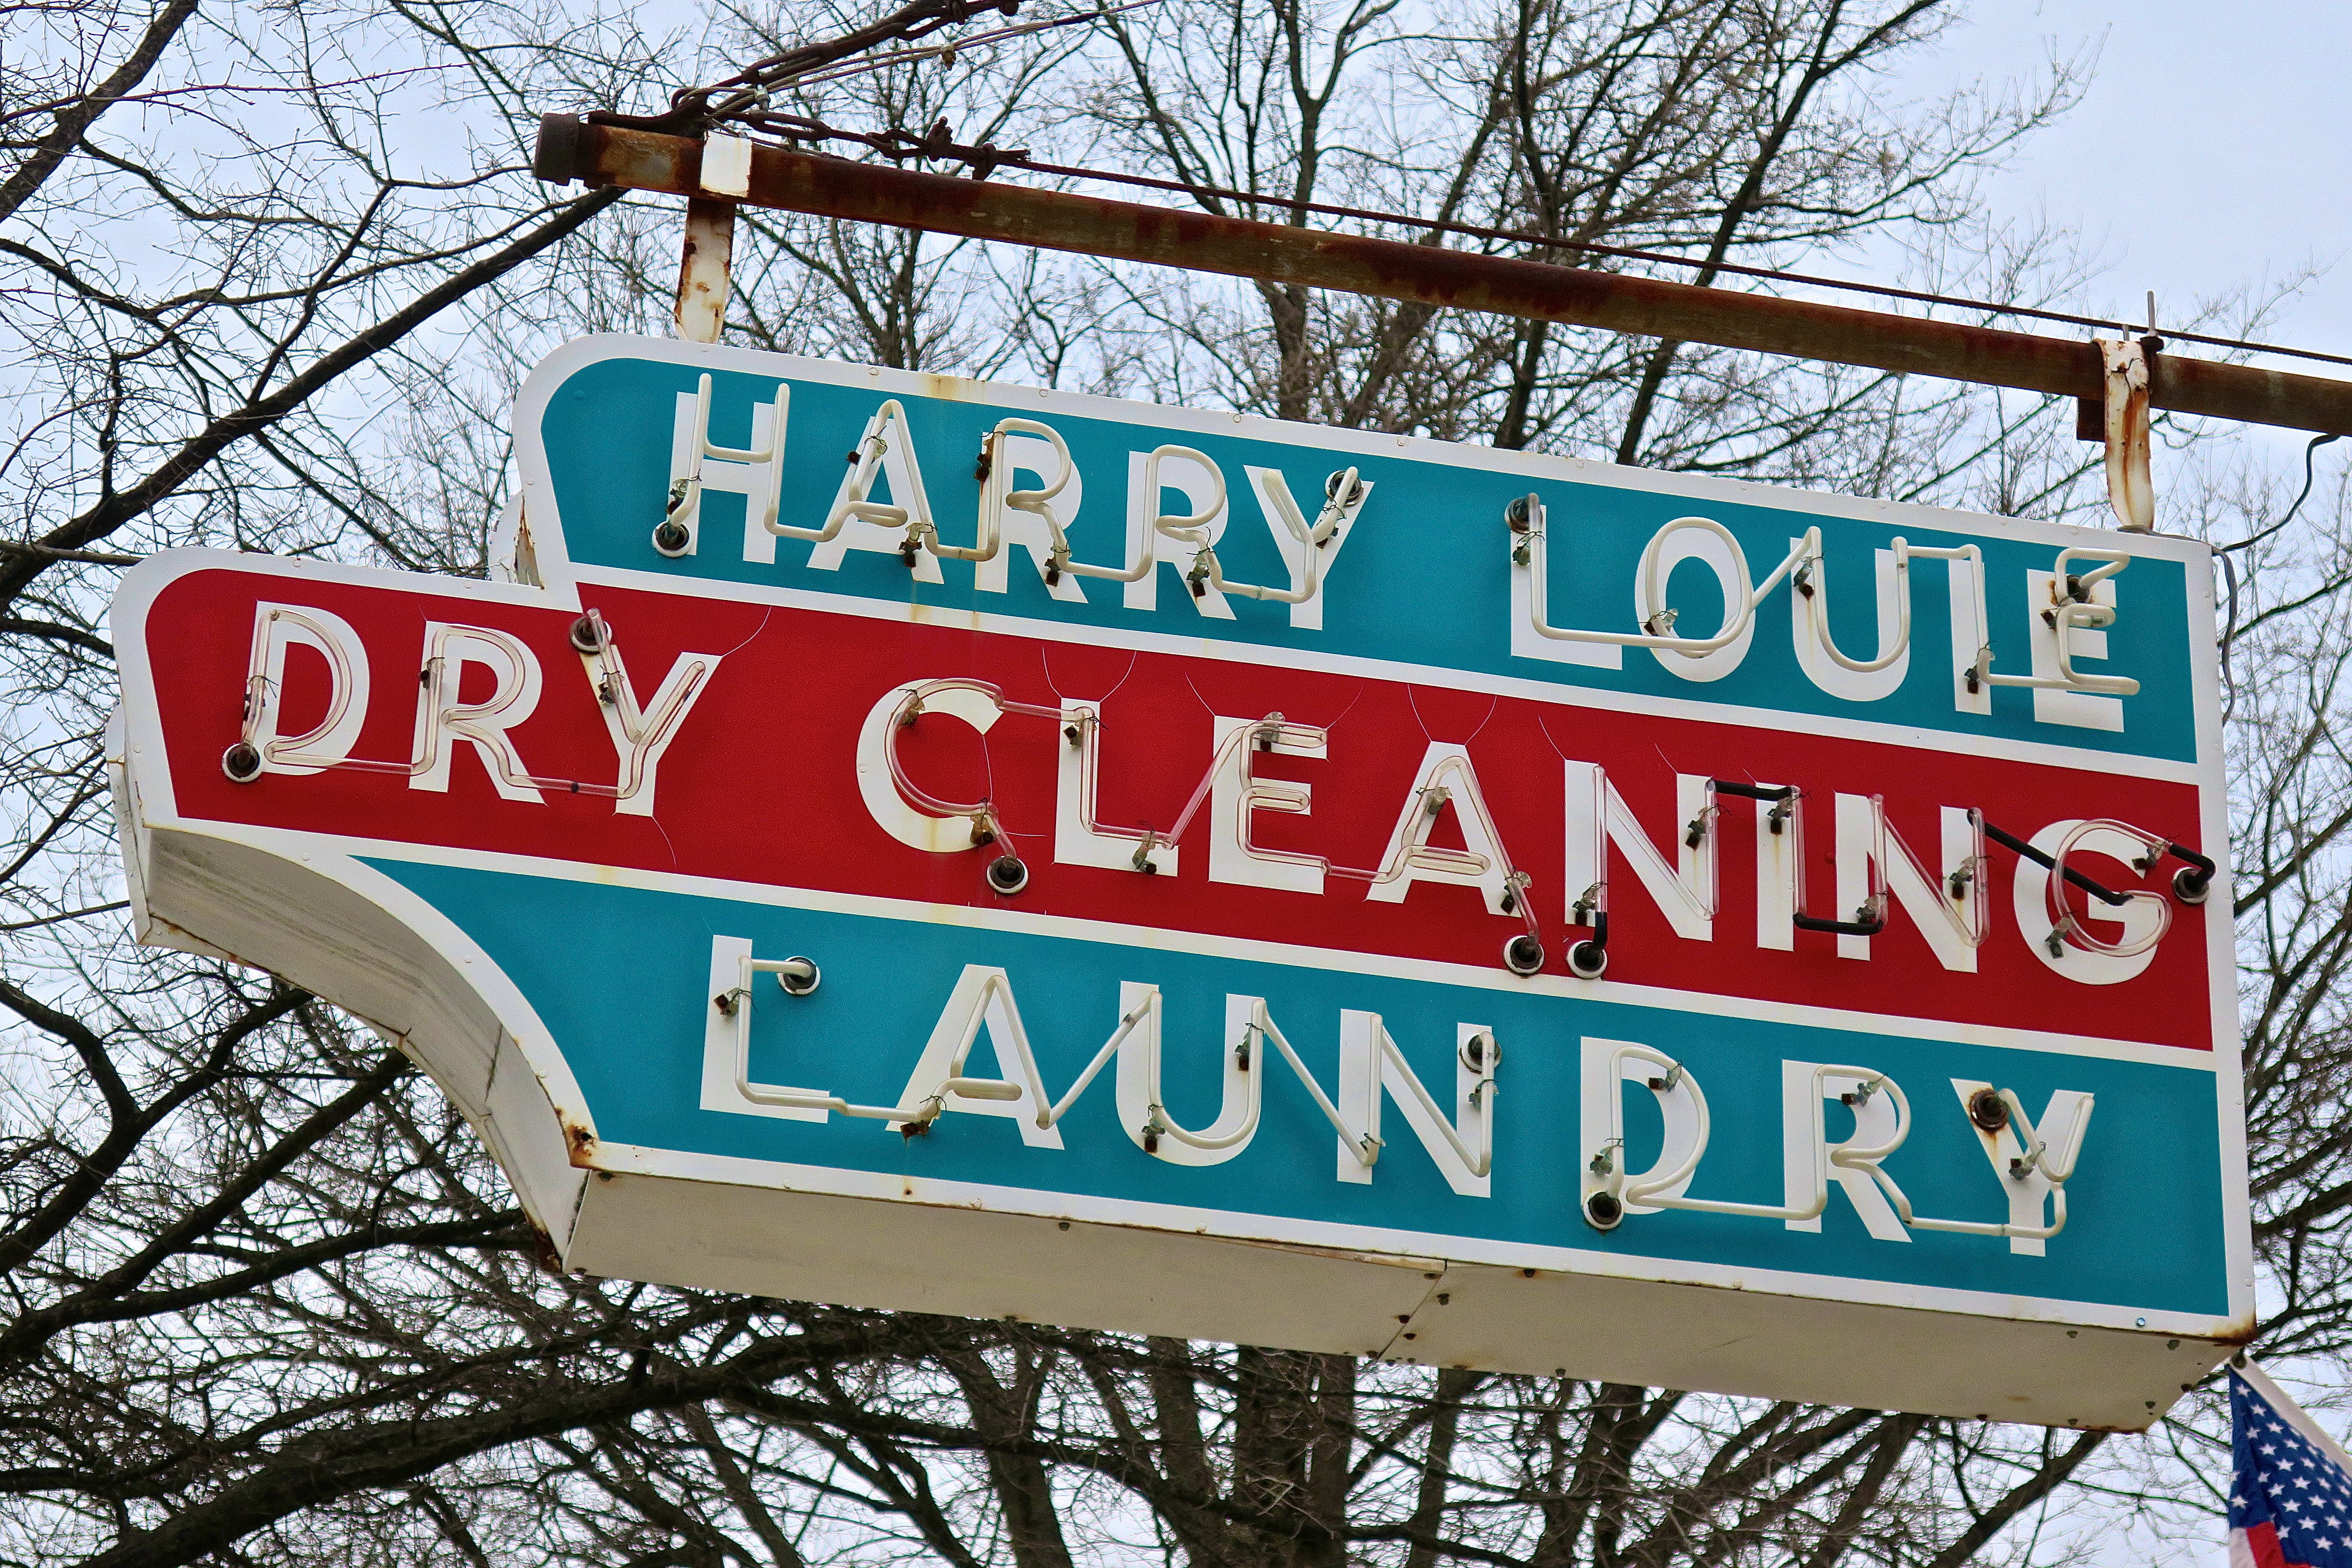 Harry Louie Laundry and Dry Cleaning - 129 South Governors Avenue, Dover, Delaware U.S.A. - April 5, 2017